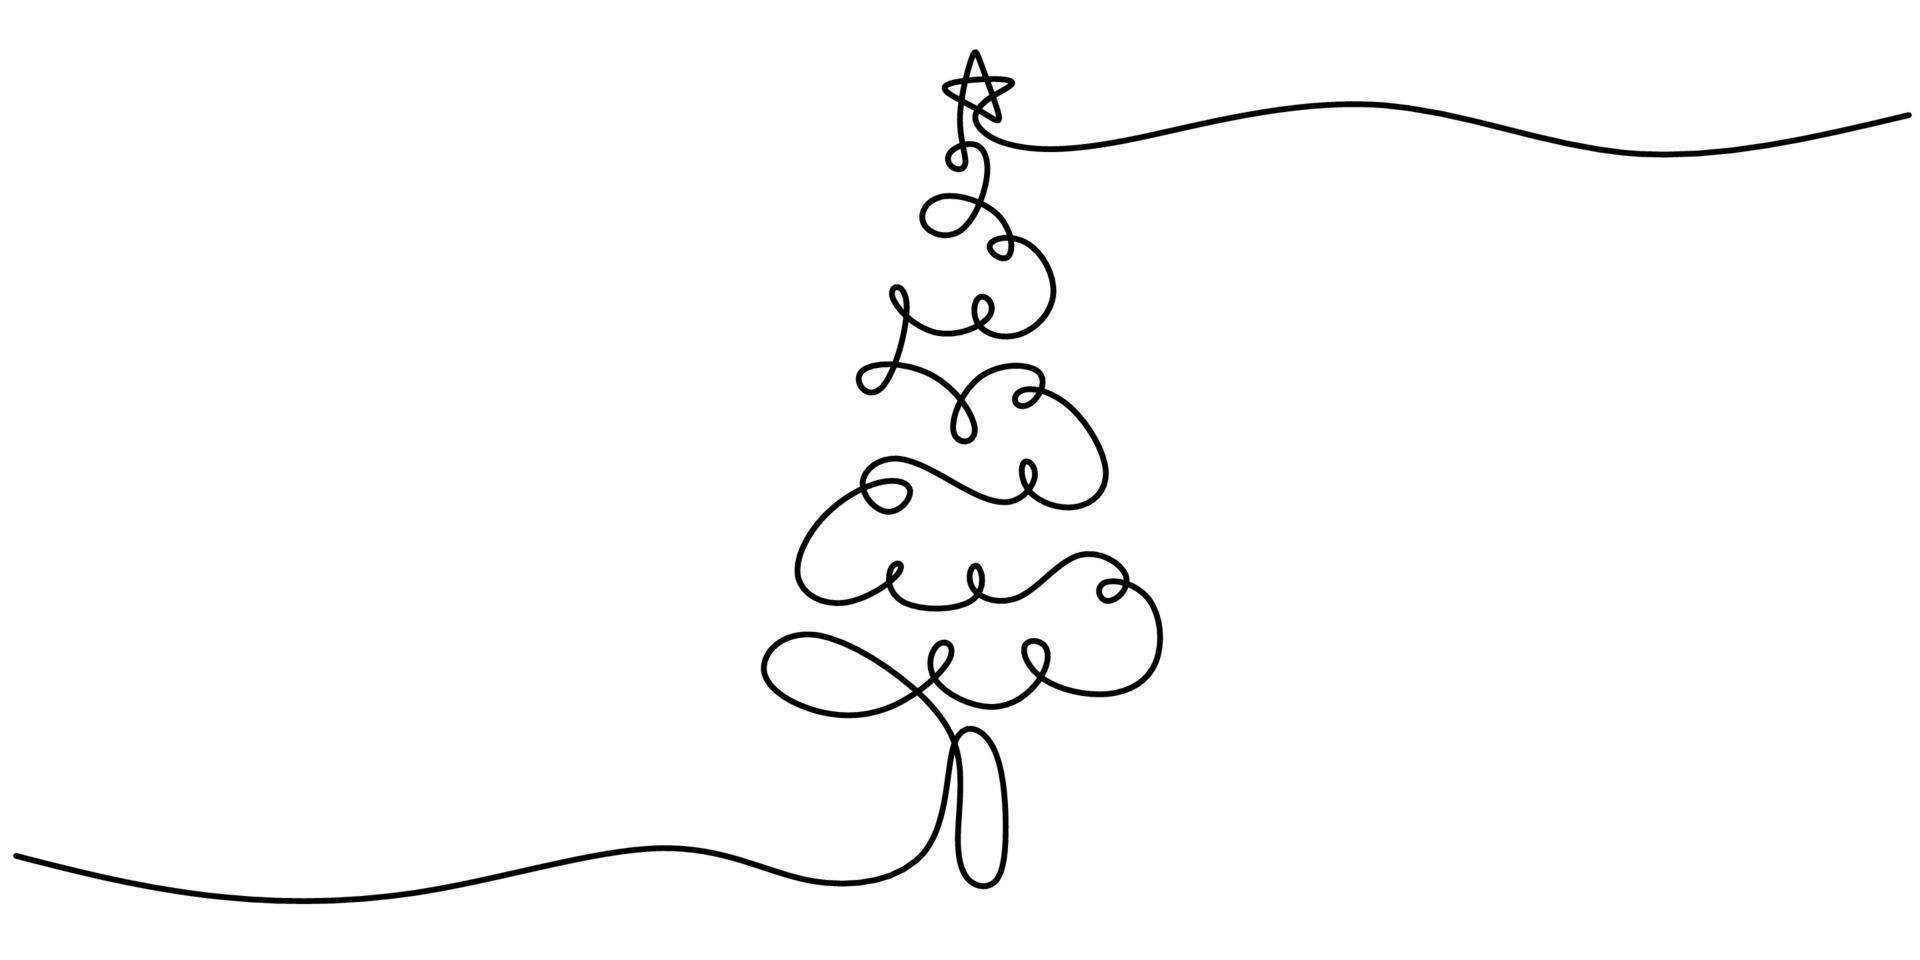 Continuous one single line of pine fir christmas vector